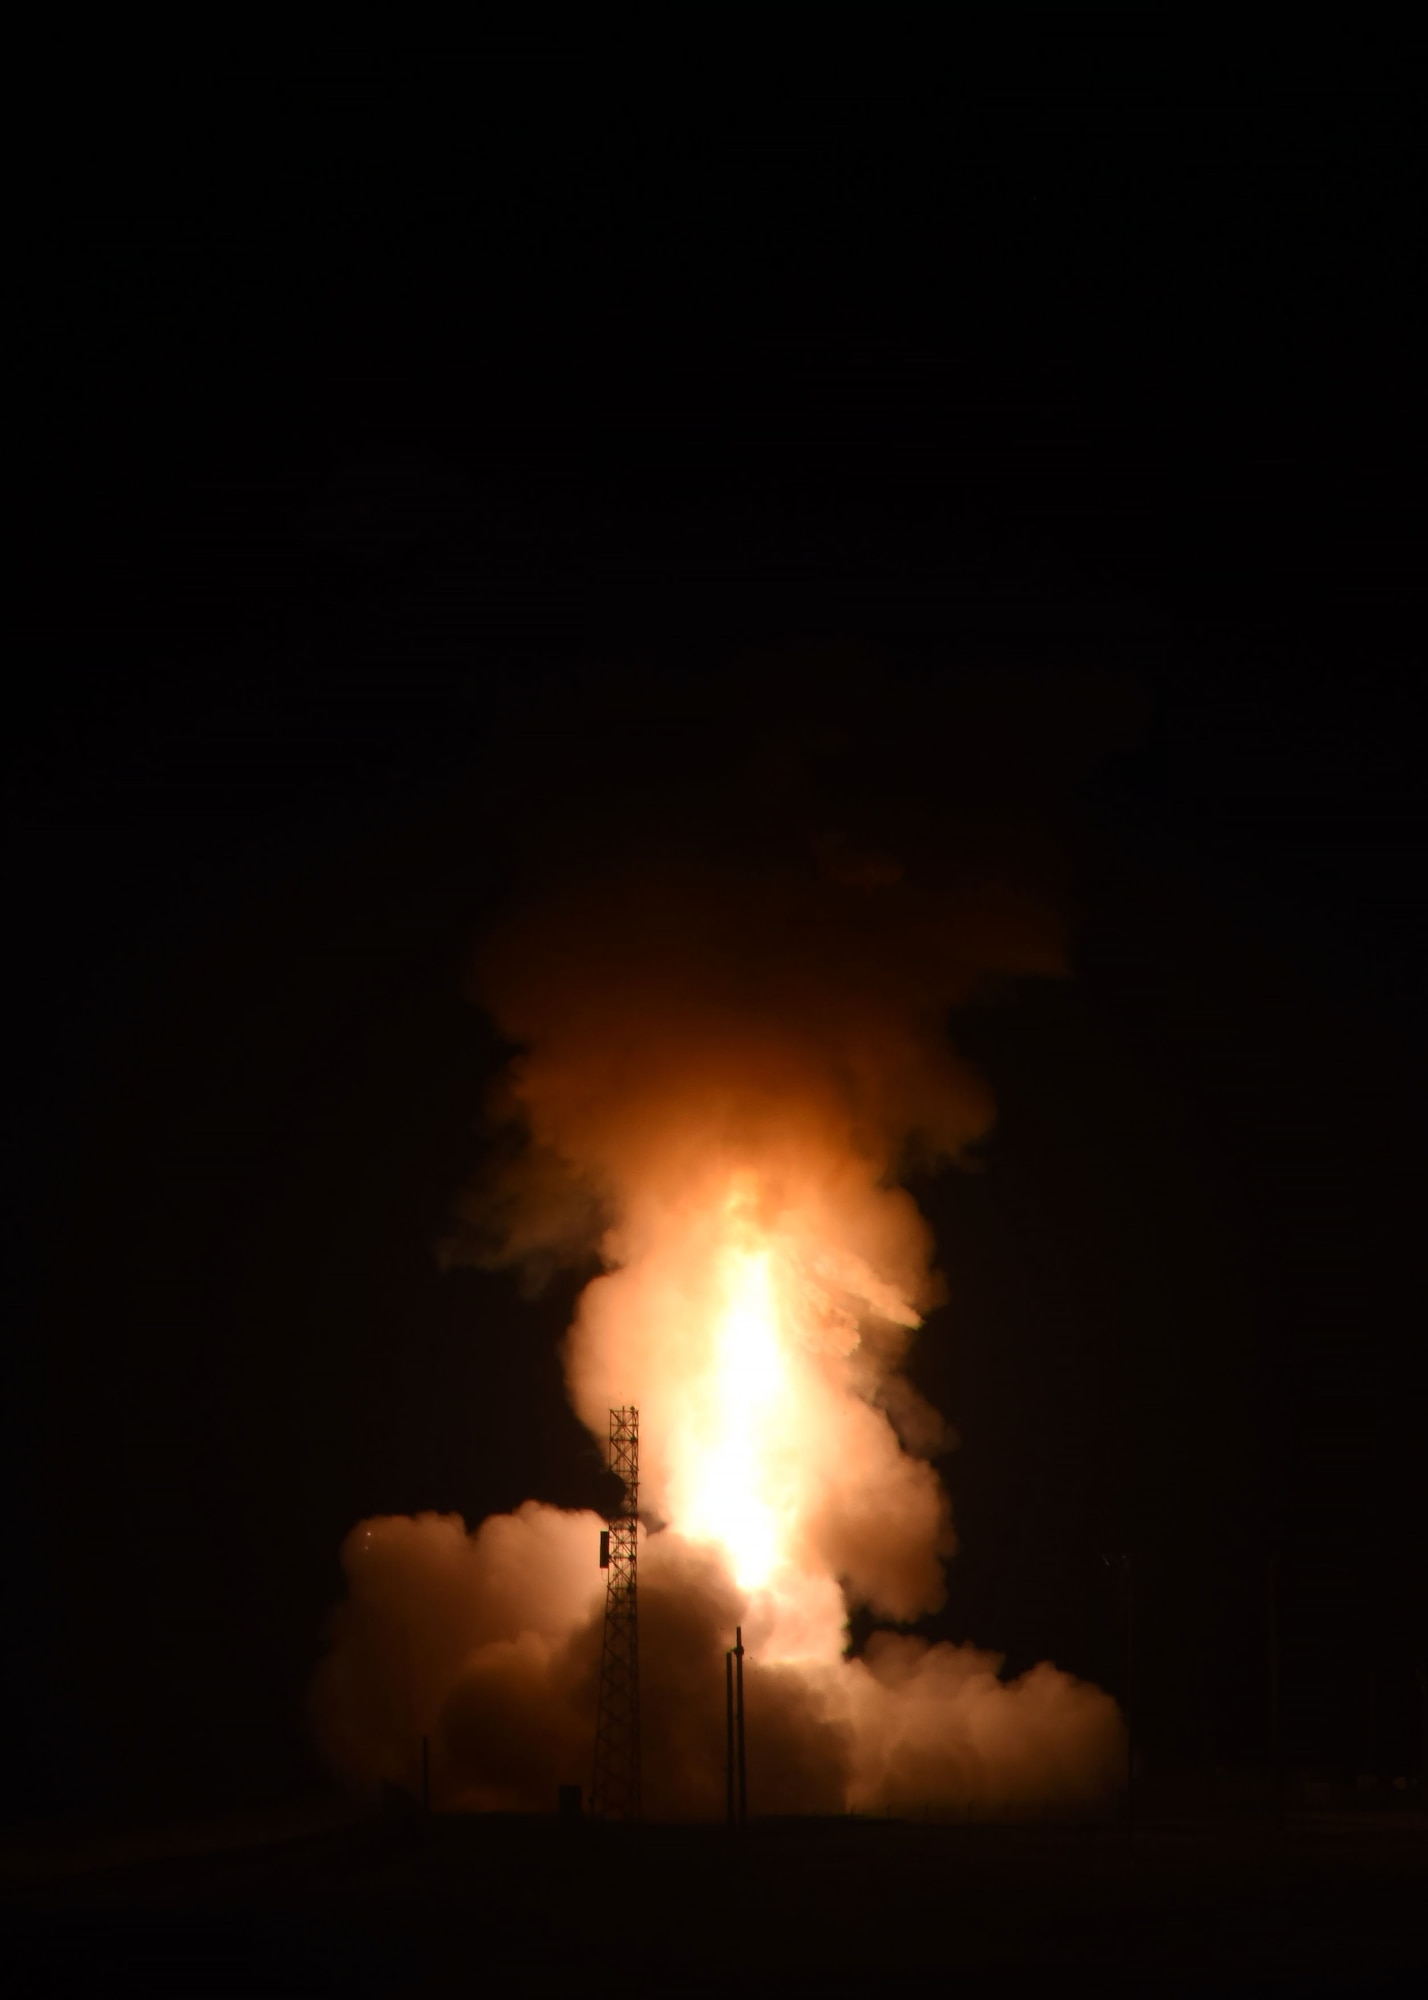 Minuteman III operational test launch from Vandenberg Air Force Base, Calif. on Aug 2, 2017.